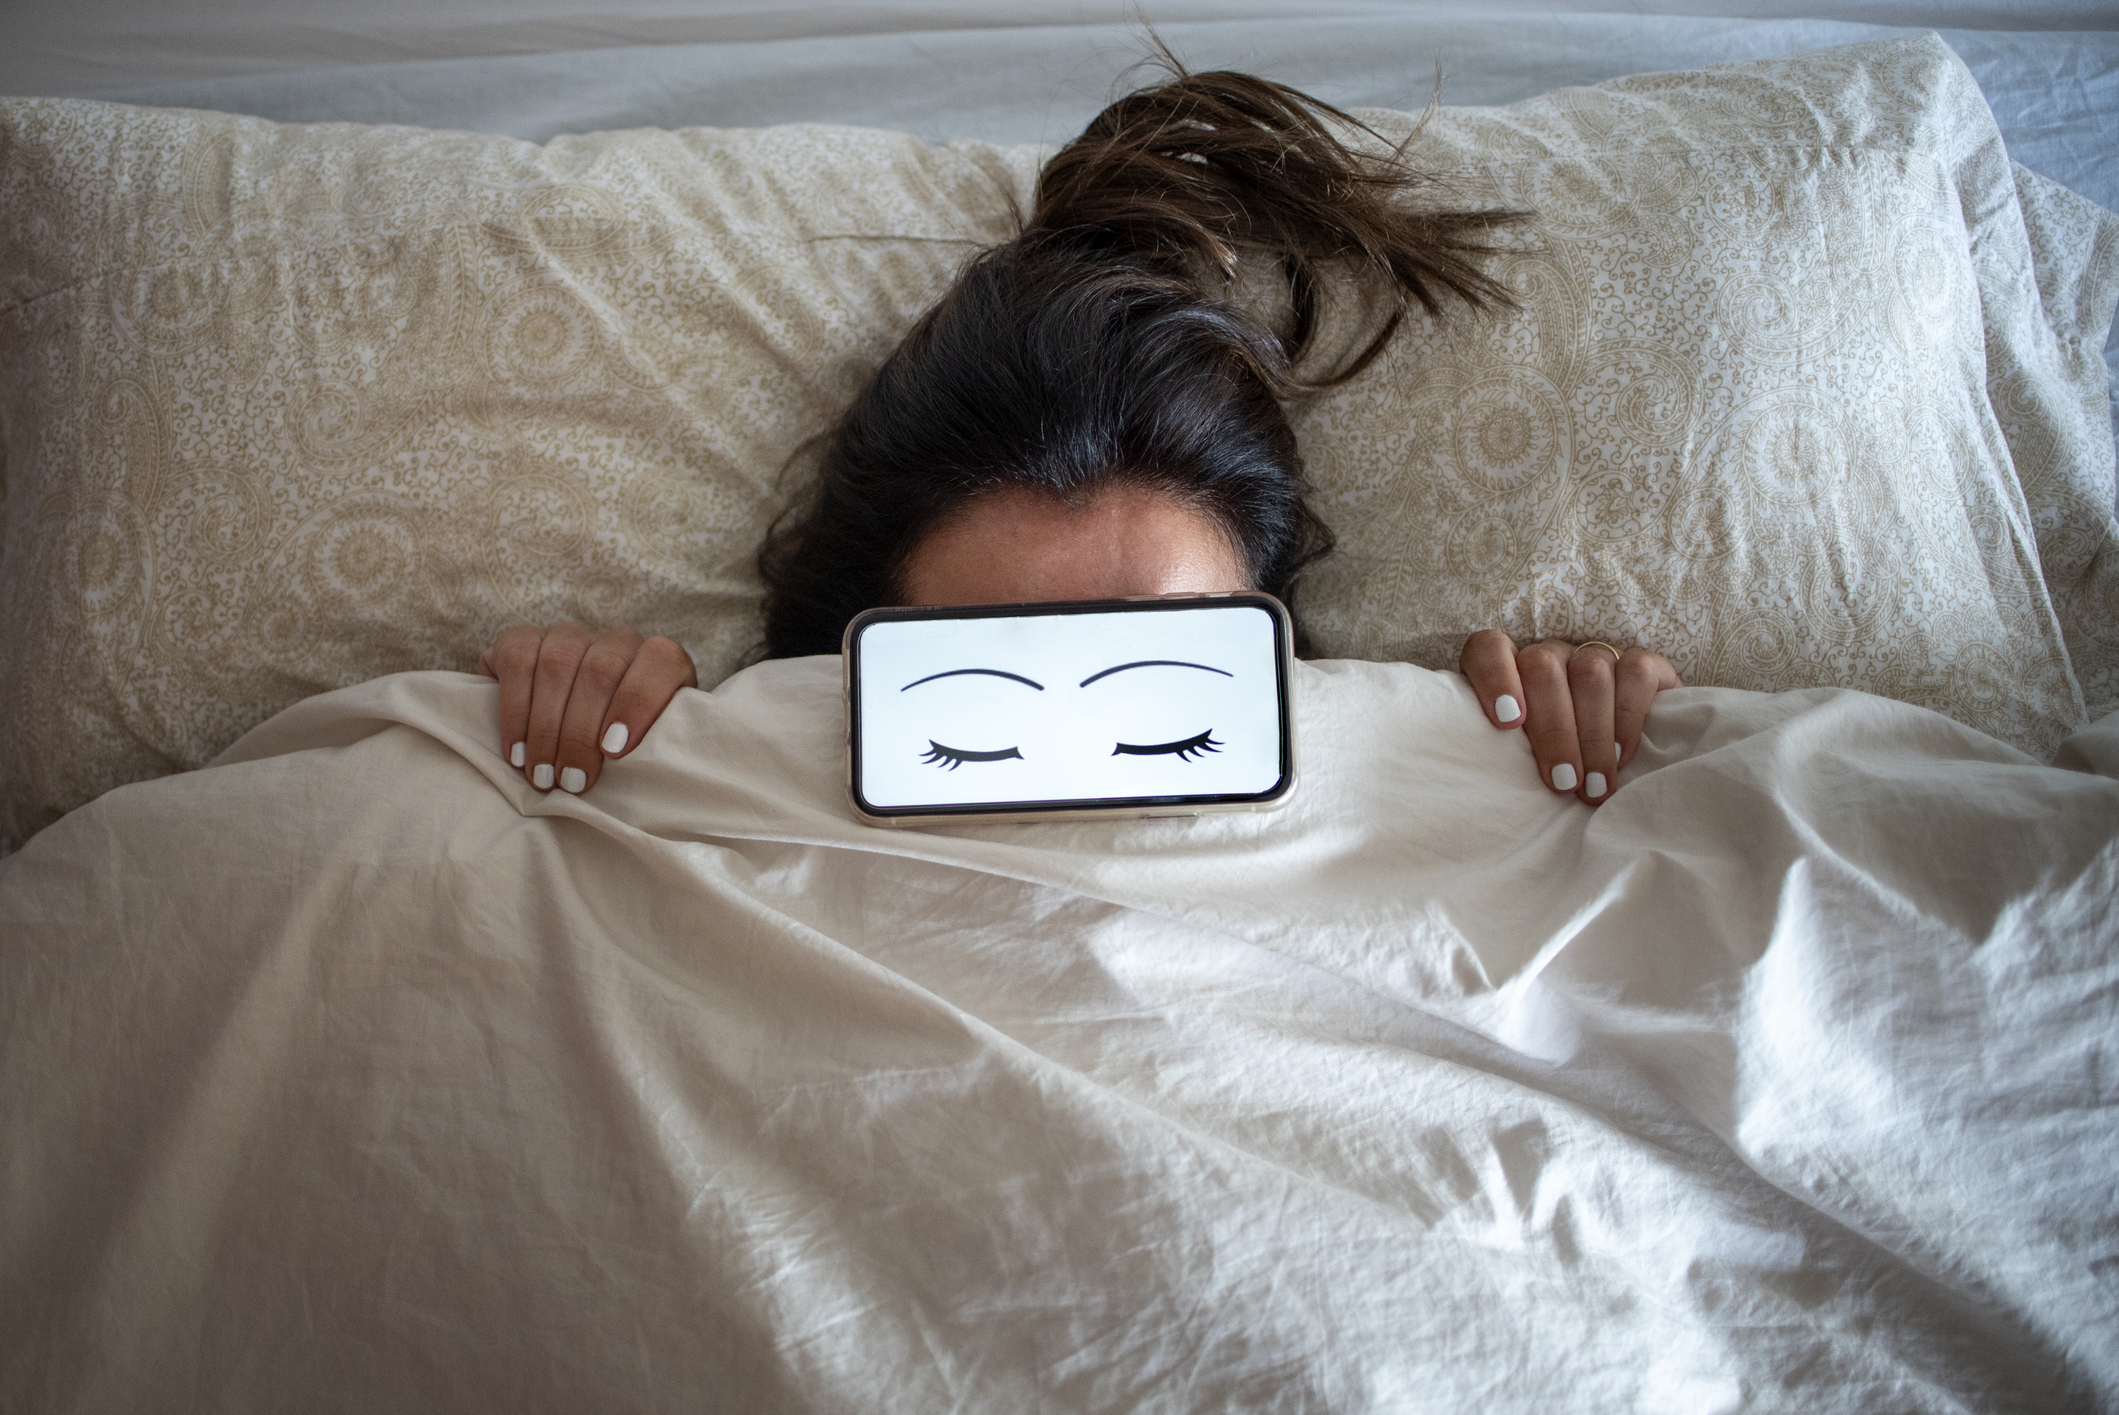 Person lying in bed covered up to forehead with a beige blanket, holding a smartphone over face displaying closed-eye graphic